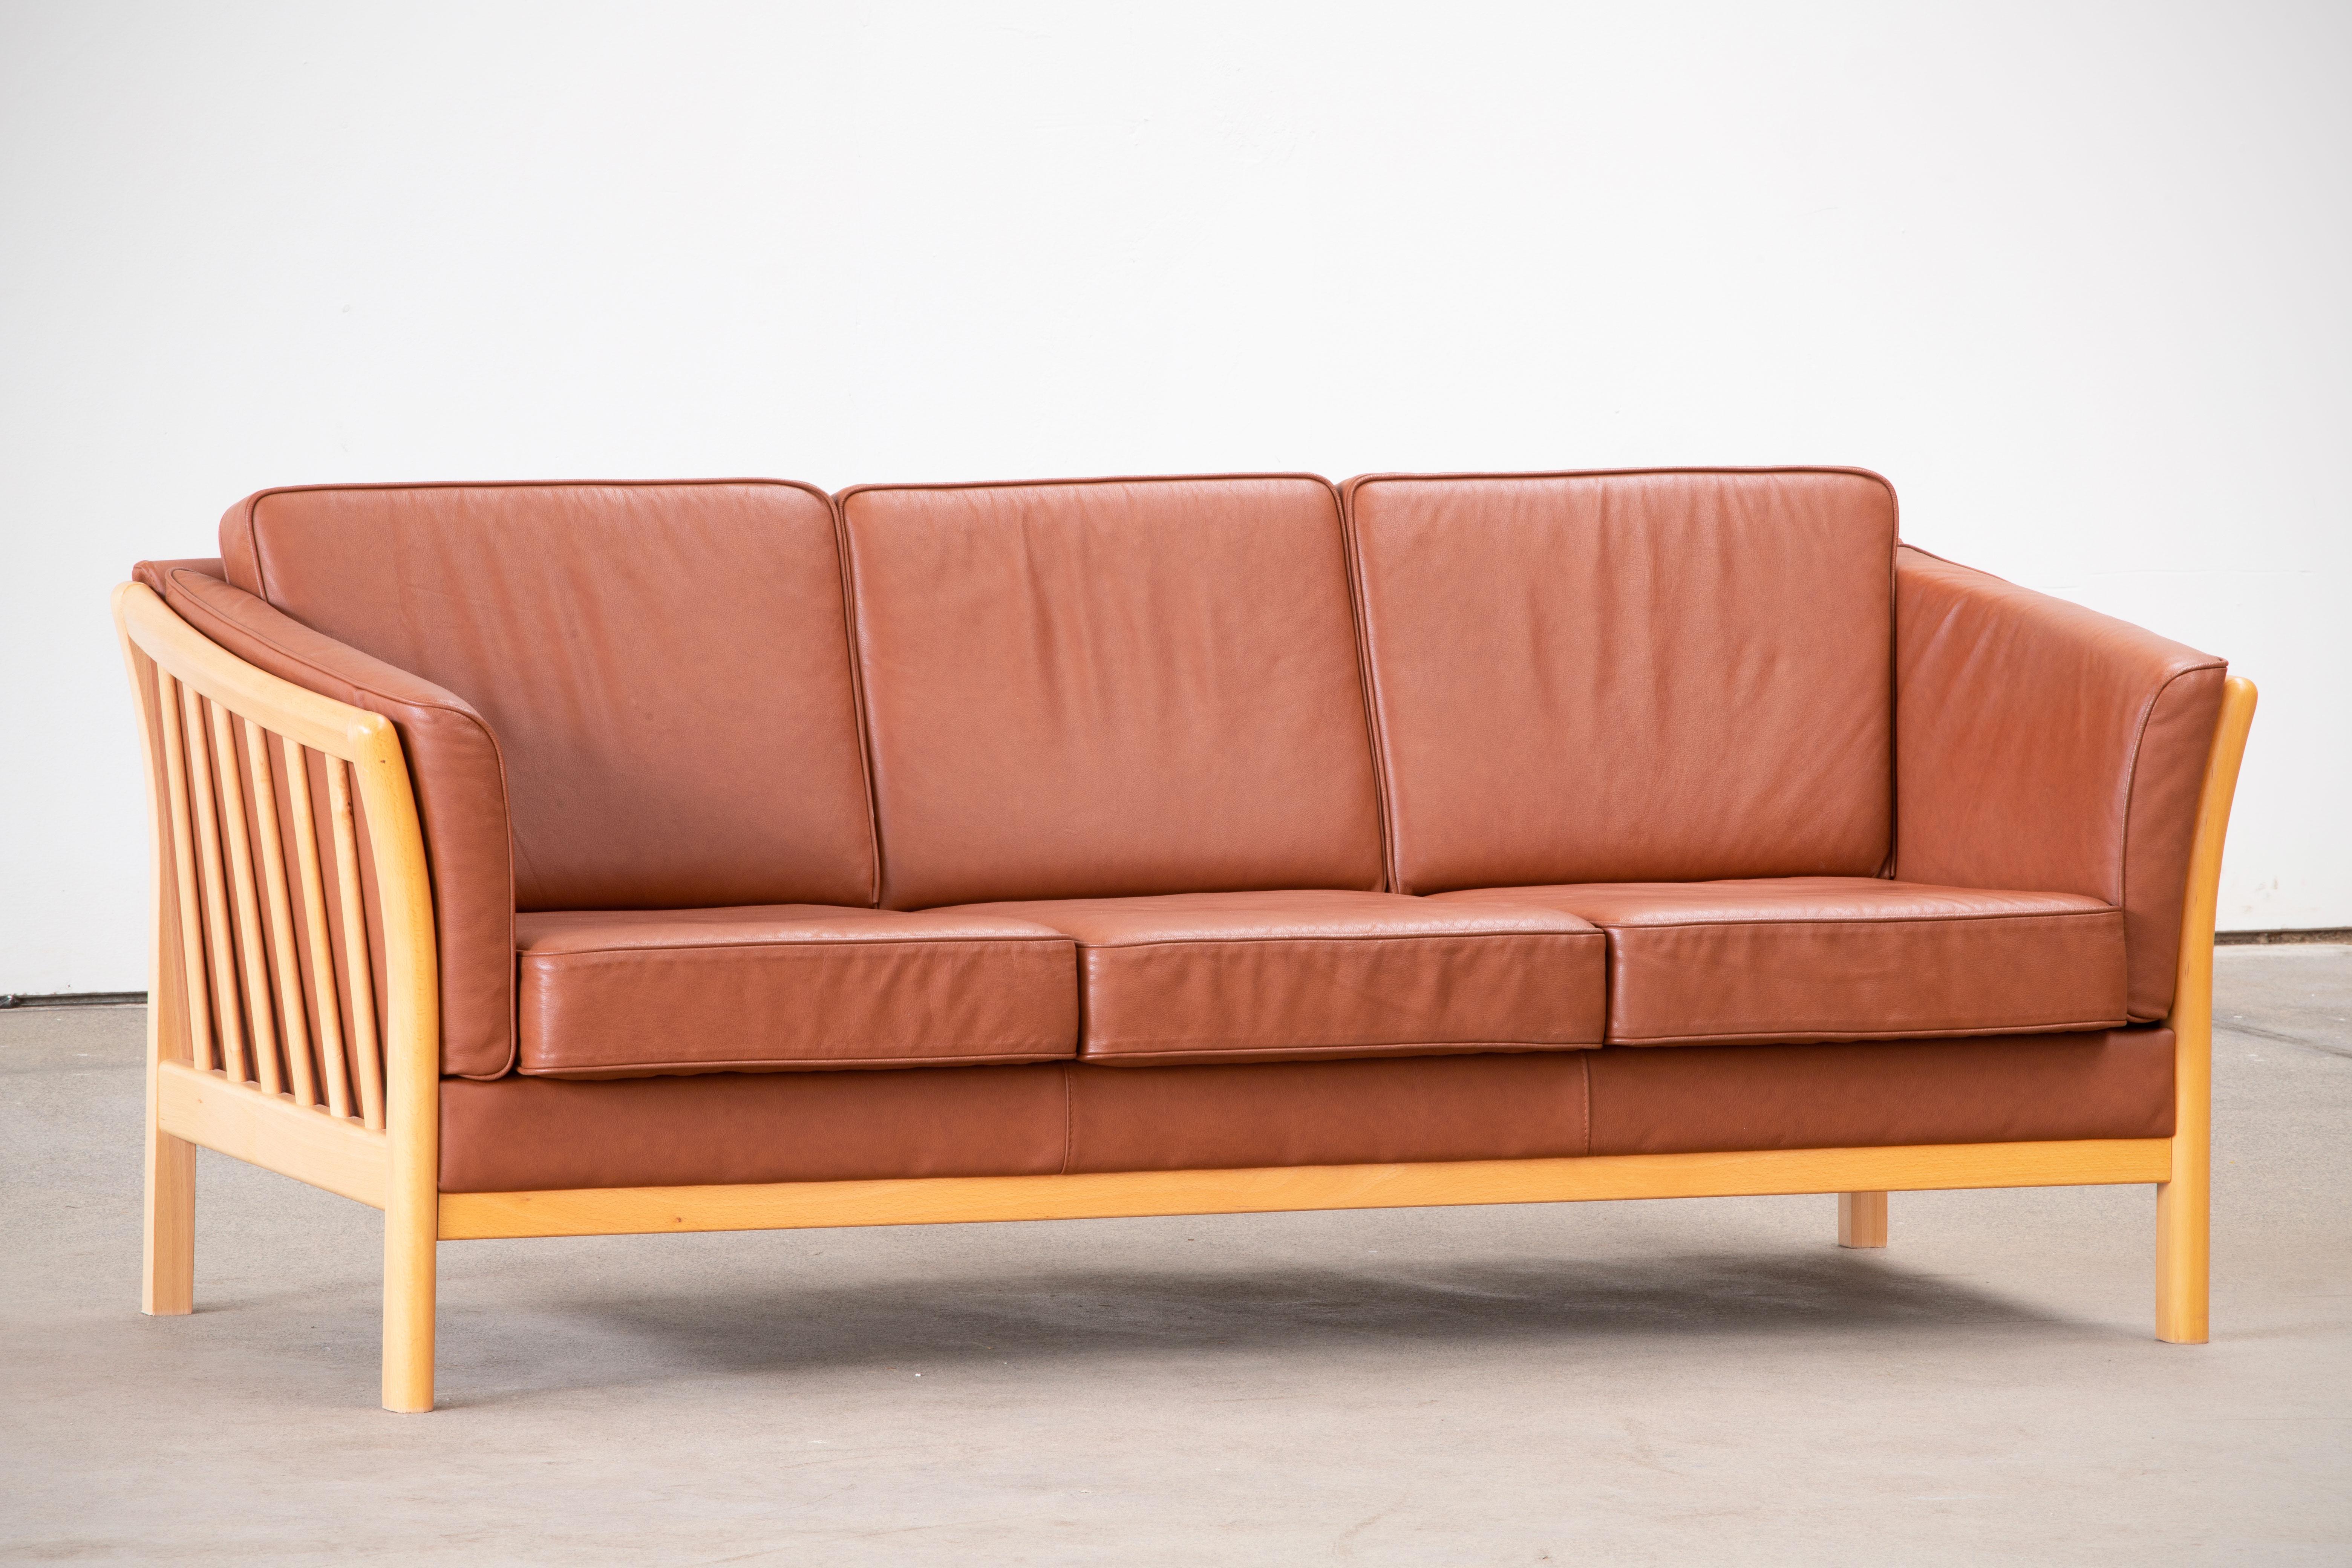 20th Century Danish Leather Sofa from the 70's